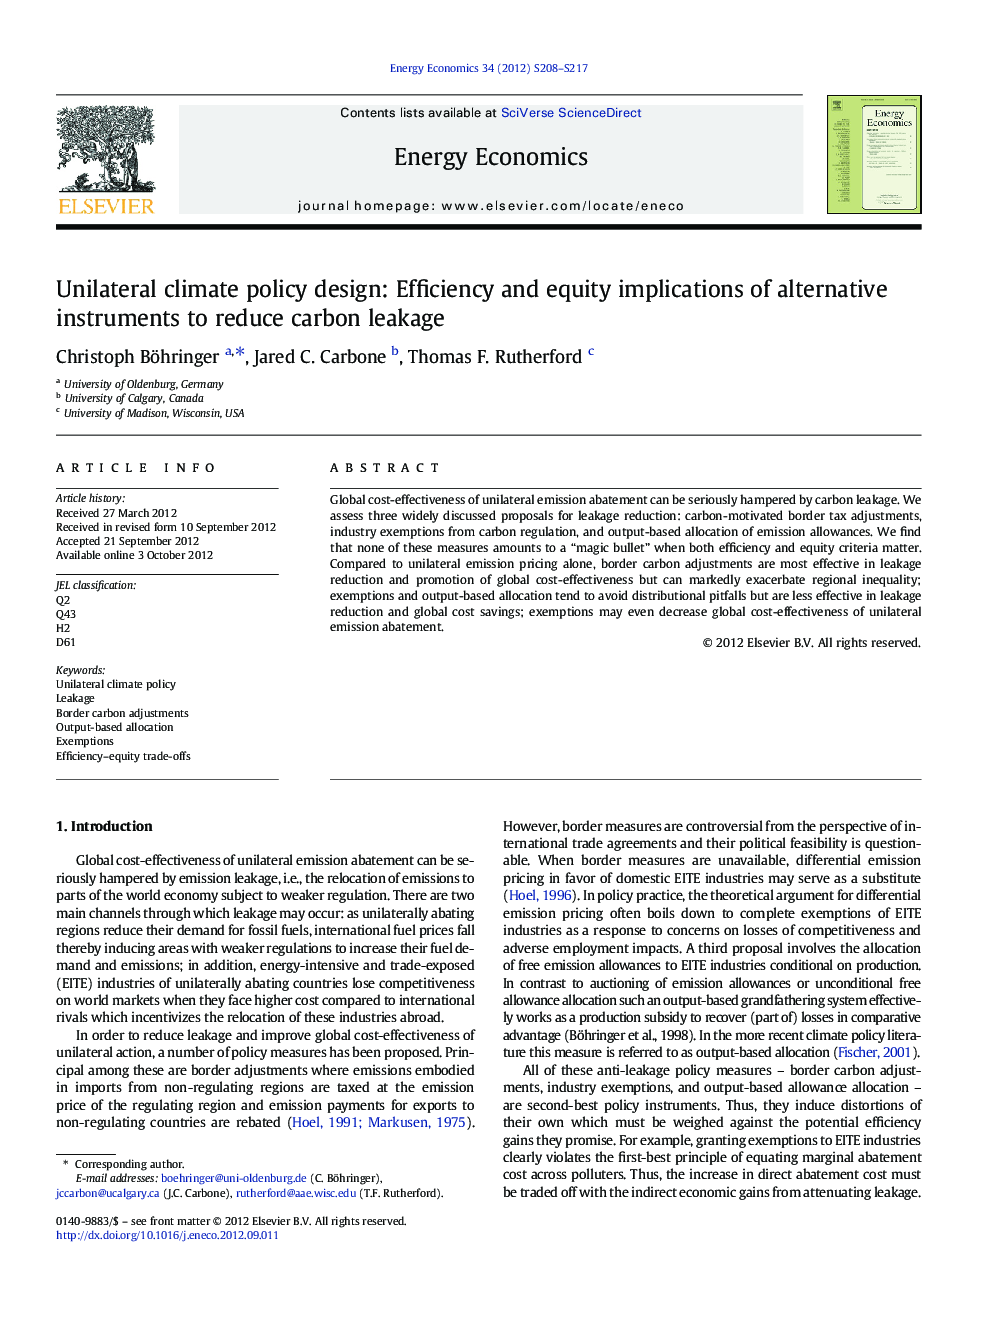 Unilateral climate policy design: Efficiency and equity implications of alternative instruments to reduce carbon leakage